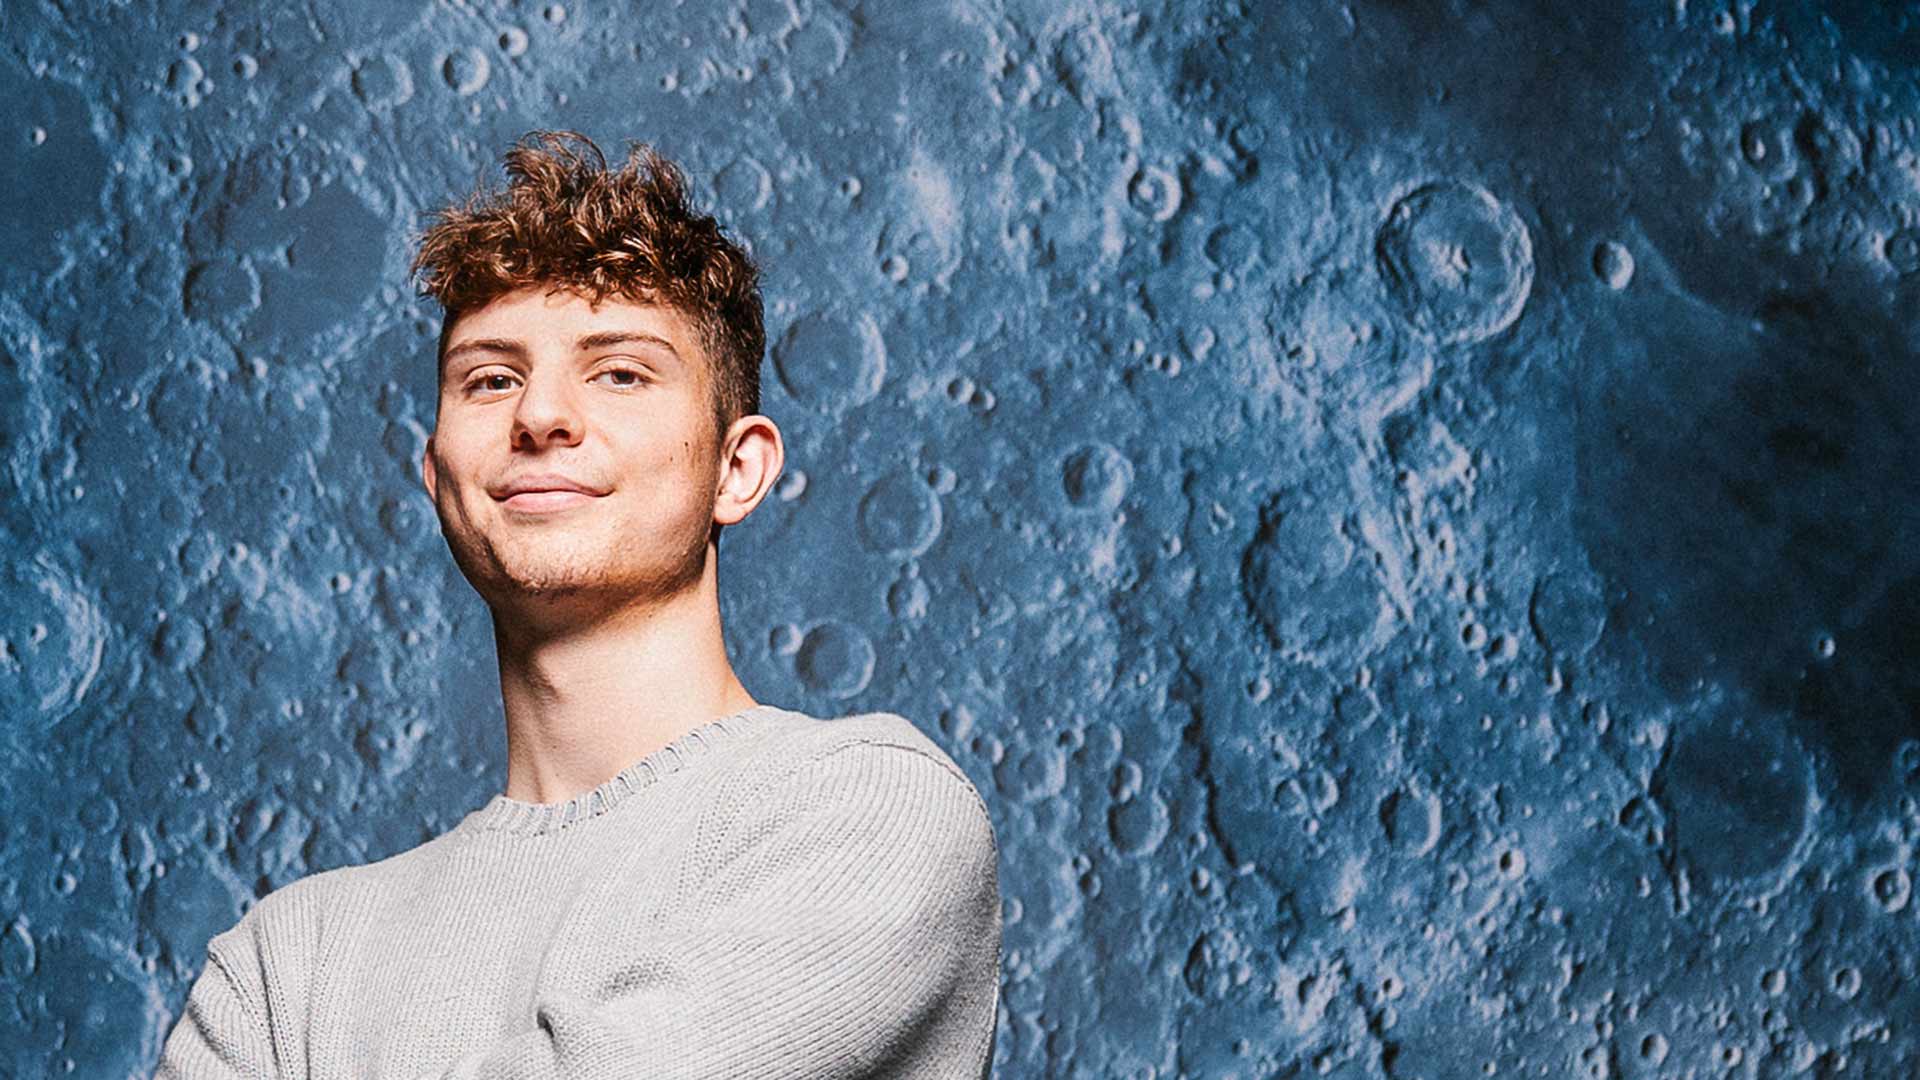 Joseph stands with arms folded in a grey sweatshirt, smiling. Behind him is a large image of a close up of the moon's surface in a blue tint